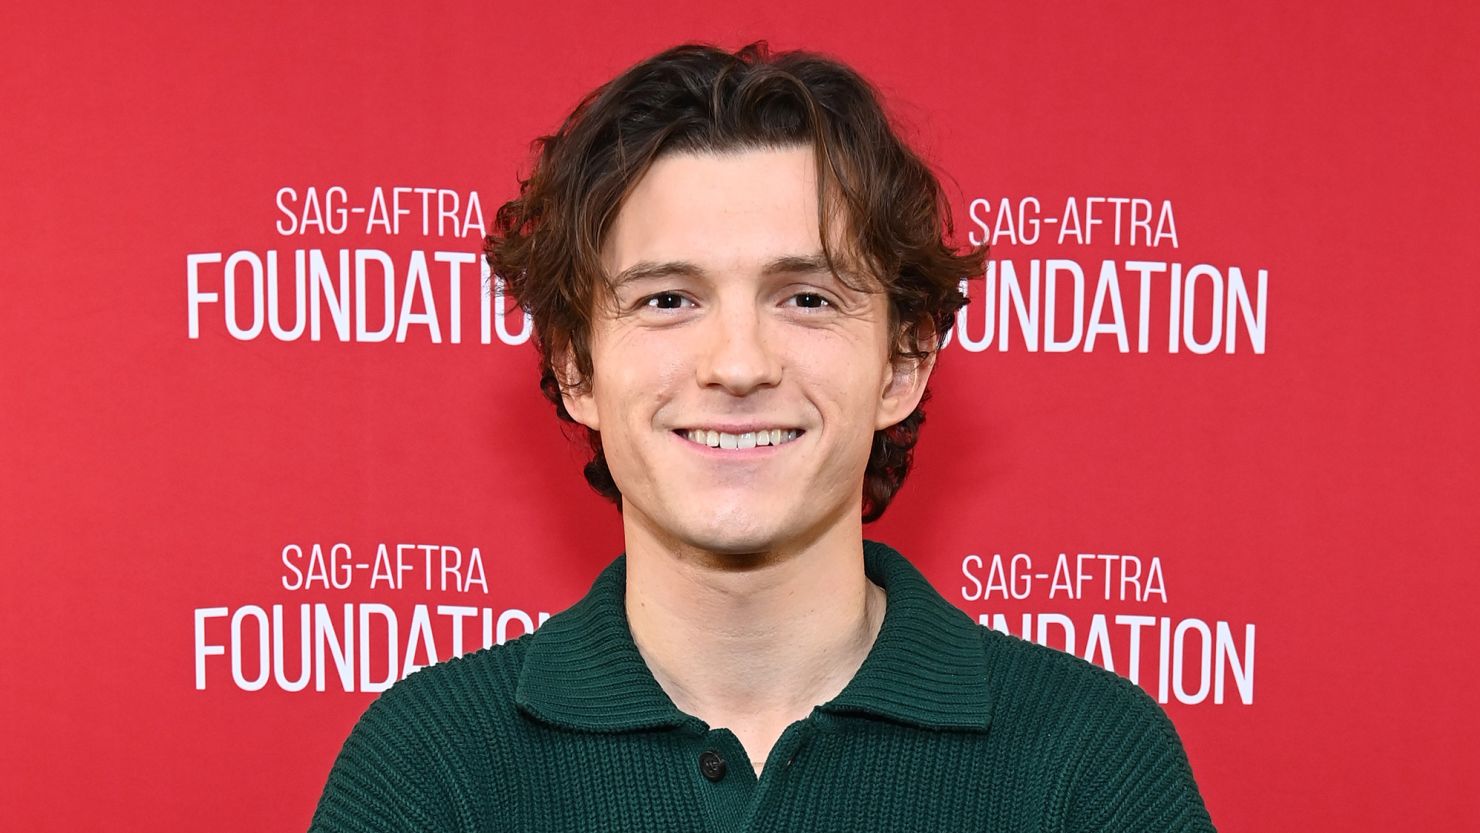 LOS ANGELES, CALIFORNIA - NOVEMBER 29: Tom Holland attends the SAG-AFTRA Foundation Conversations - "The Crowded Room" at SAG-AFTRA Foundation Screening Room on November 29, 2023 in Los Angeles, California. (Photo by Araya Doheny/Getty Images)